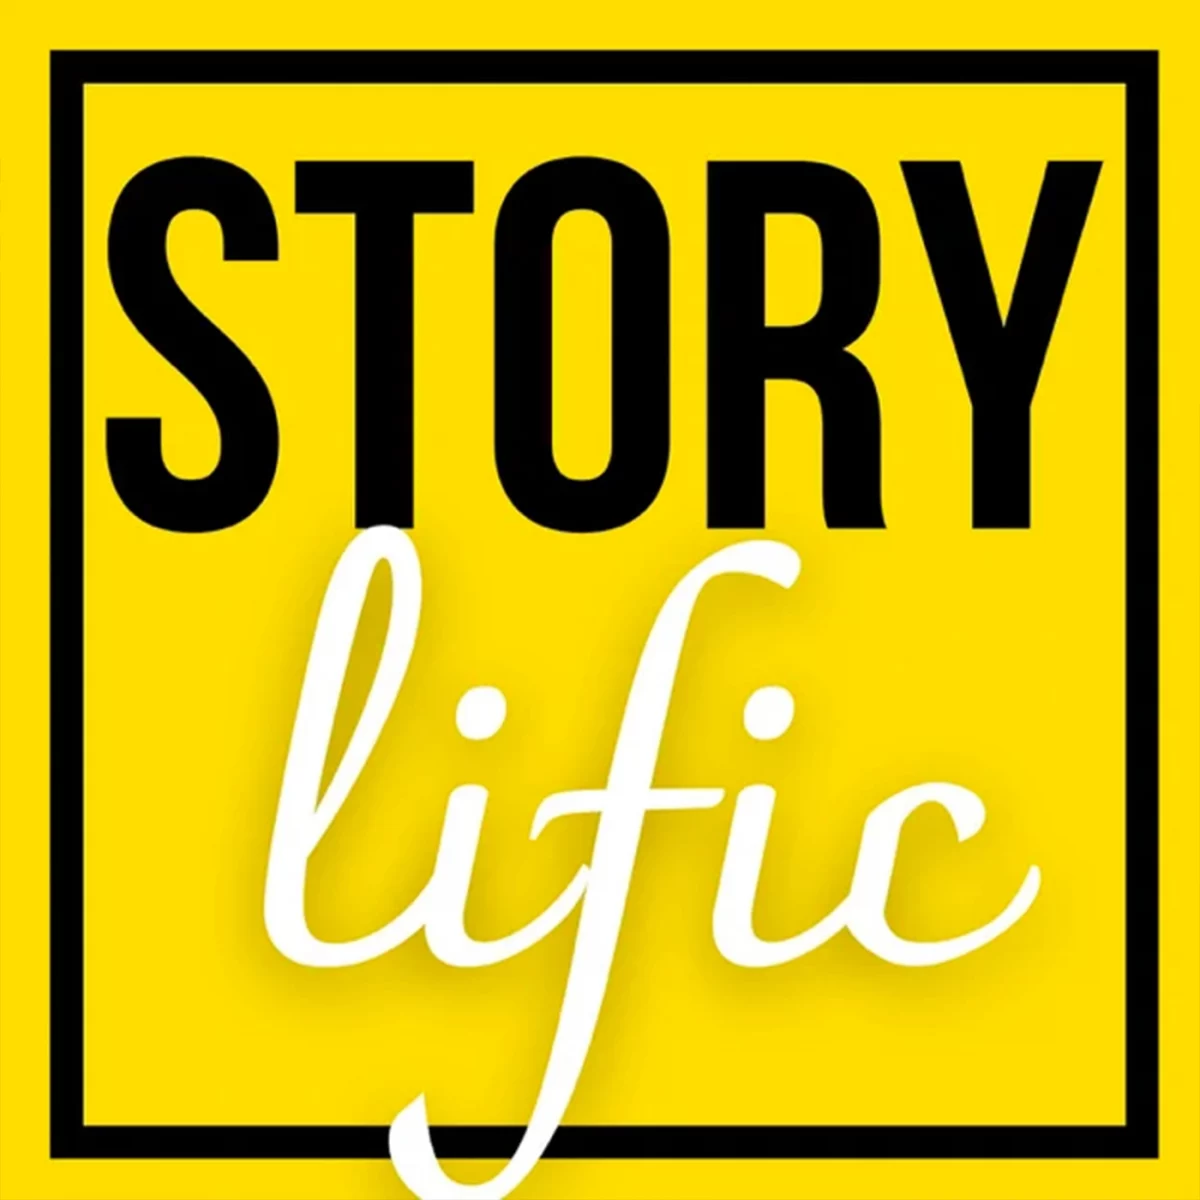 Podcast : StoryLific